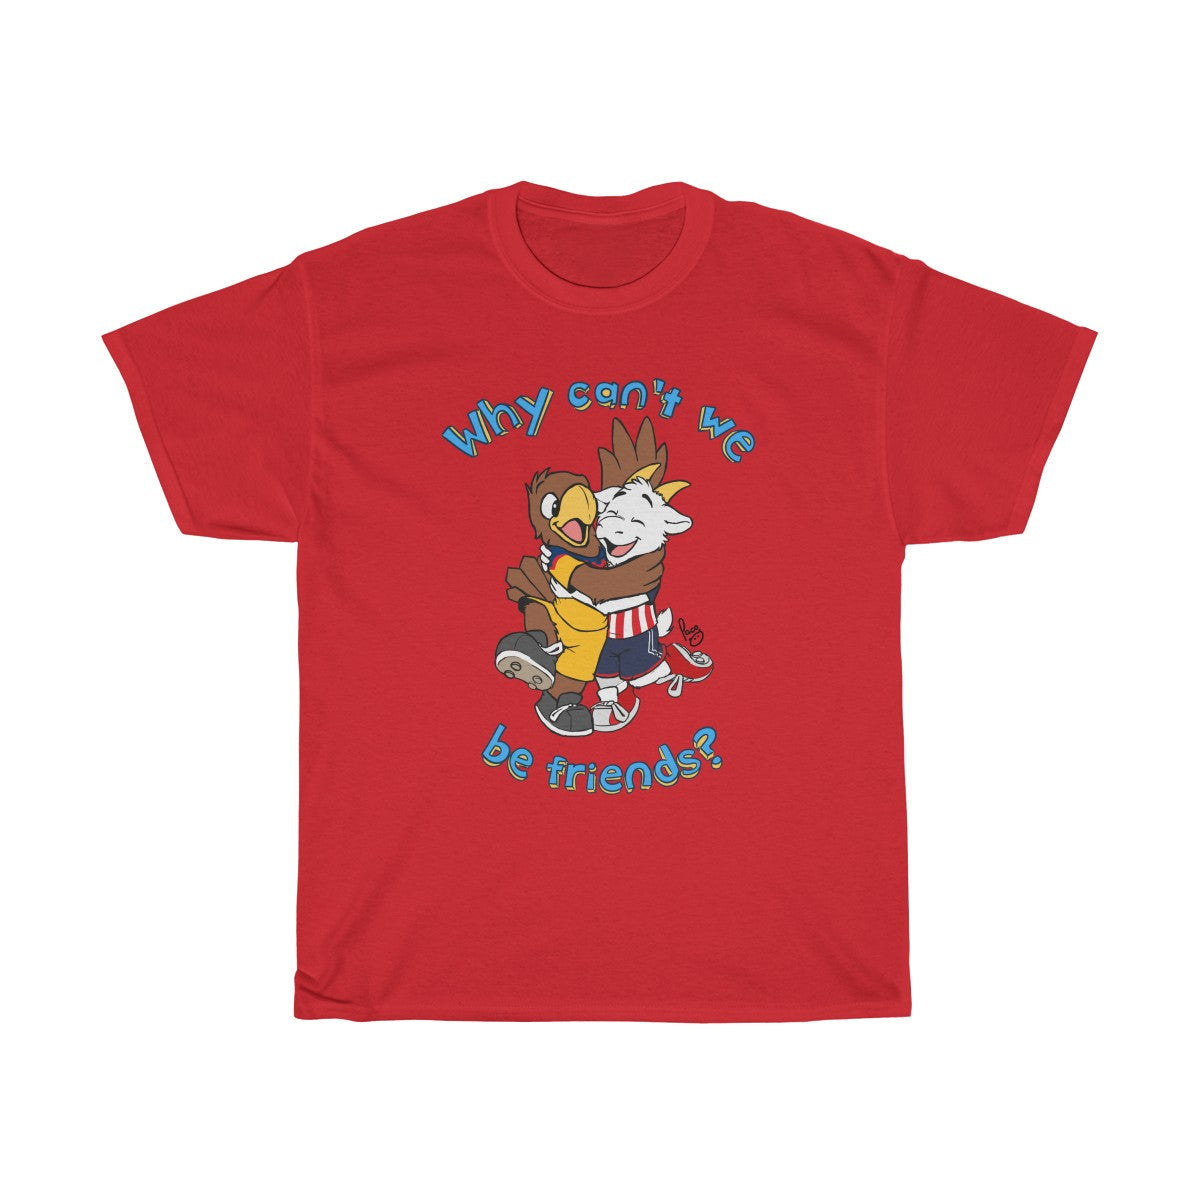 Why Can't we be Friends? - T-Shirt T-Shirt Paco Panda Red S 